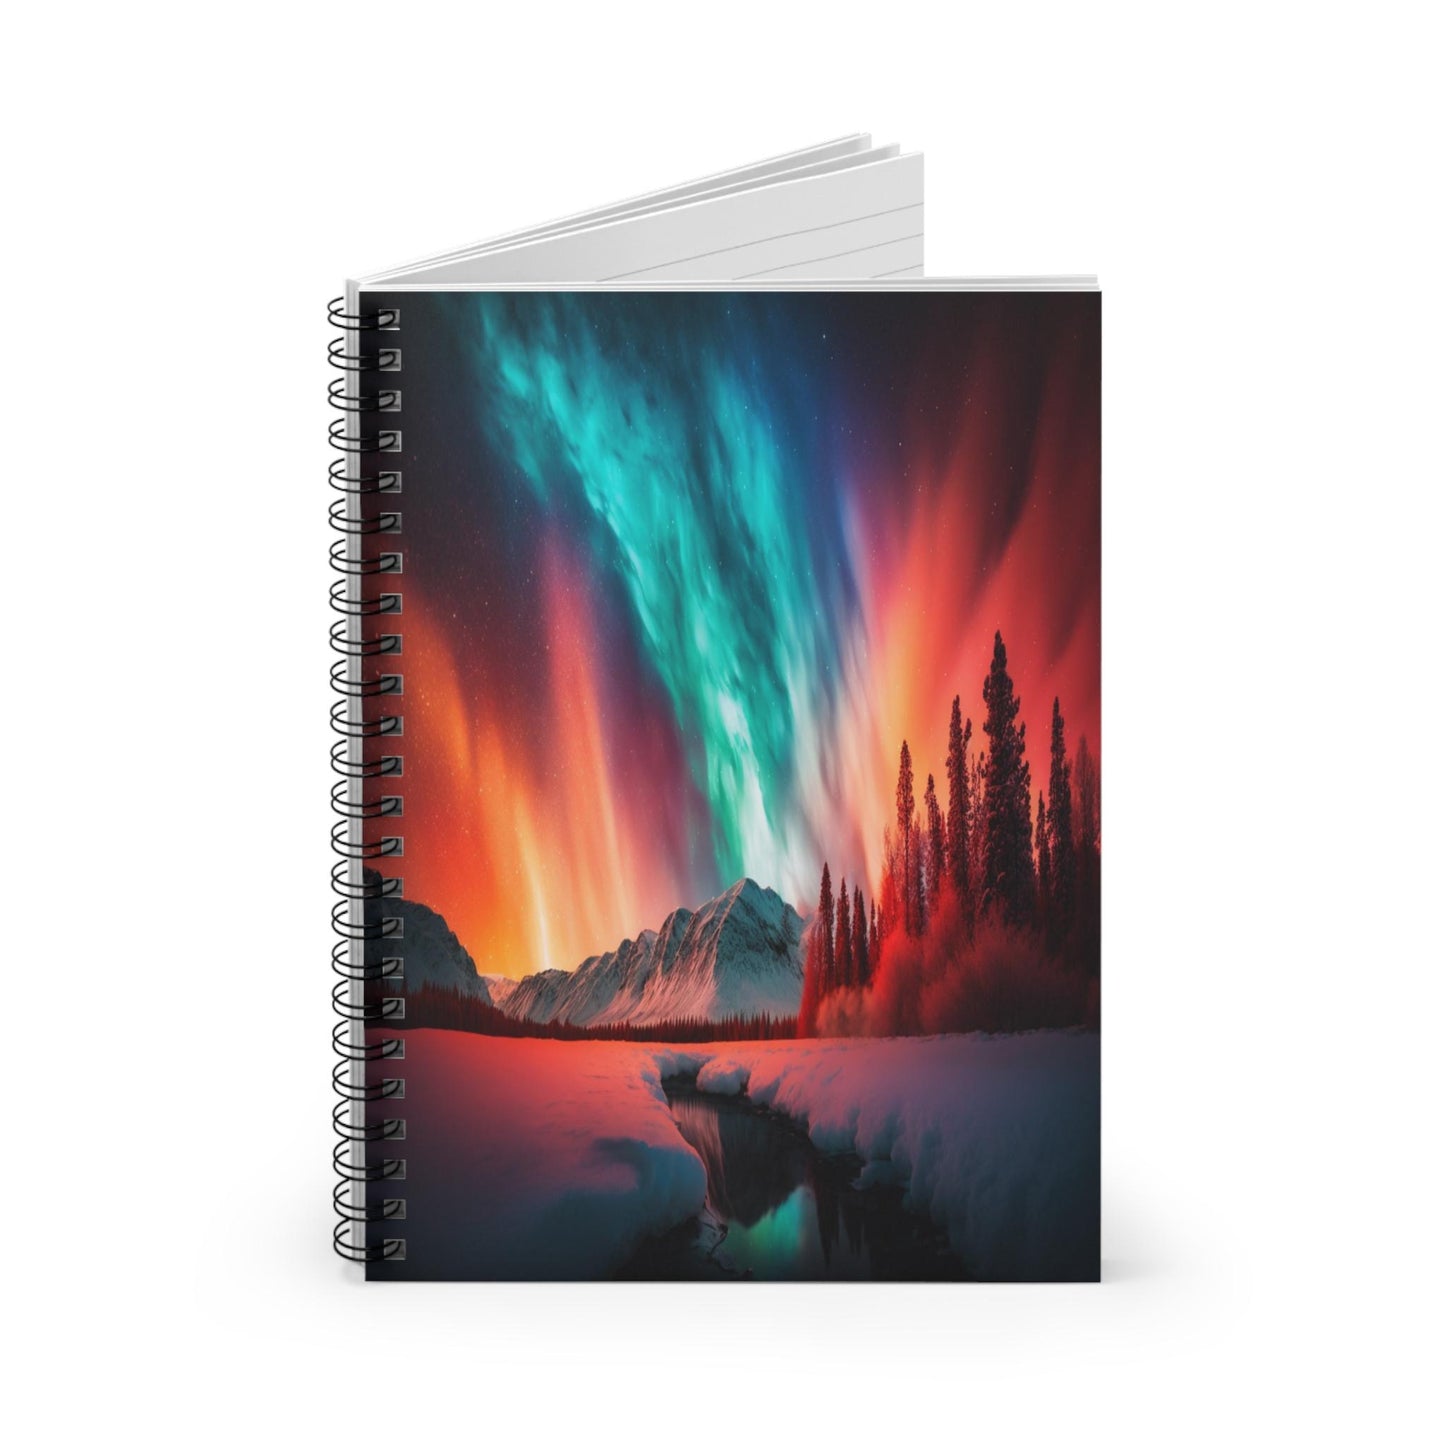 Unique Aurora Borealis Spiral Notebook Ruled Line - Personalized Northern Light View - Stationary Accessories - Perfect Aurora Lovers Gift 40